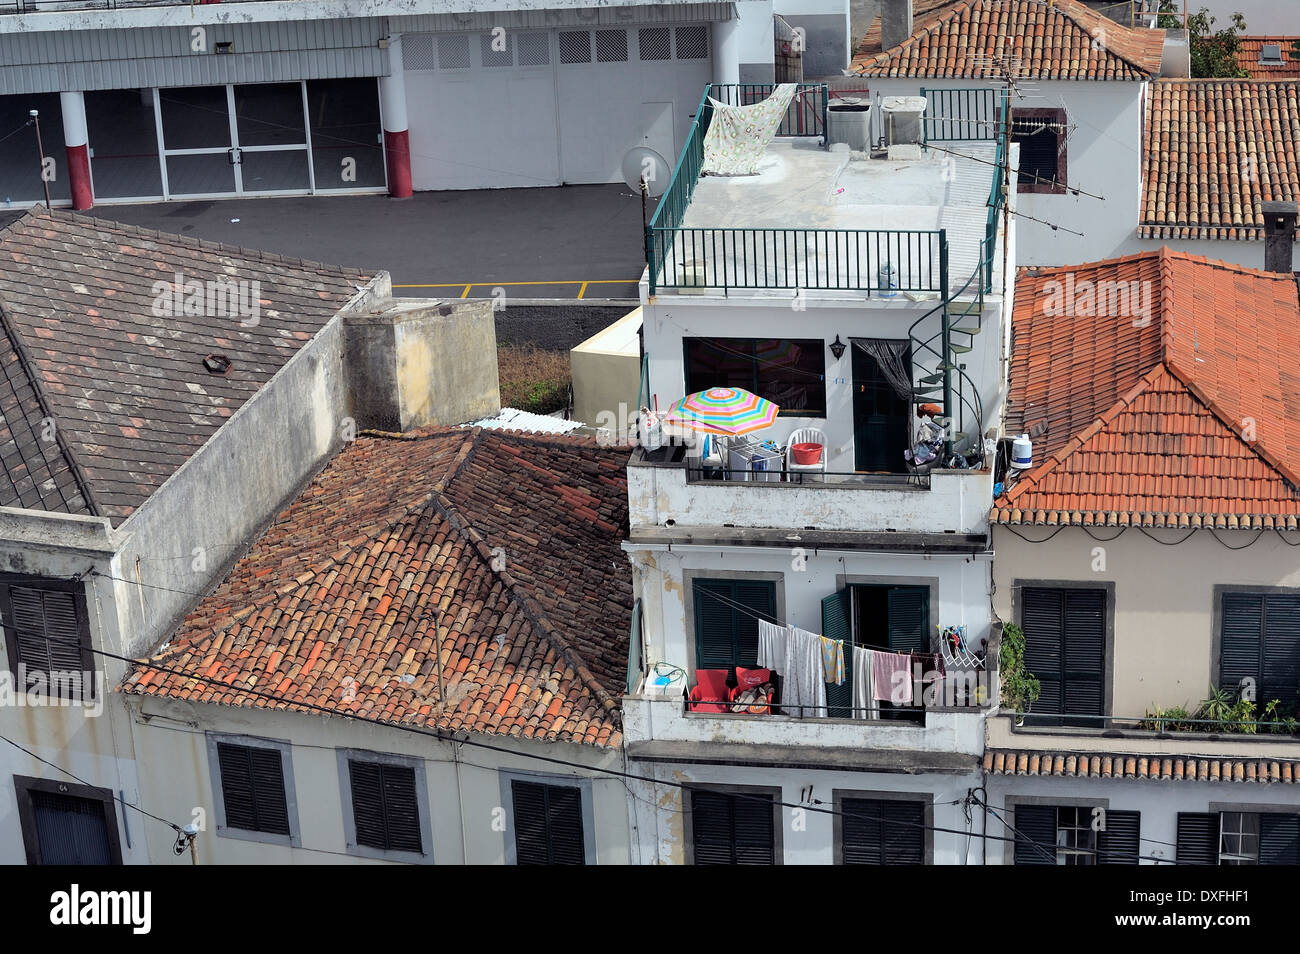 Funchal Madeira A view of city living accommodation from a cable car Stock Photo